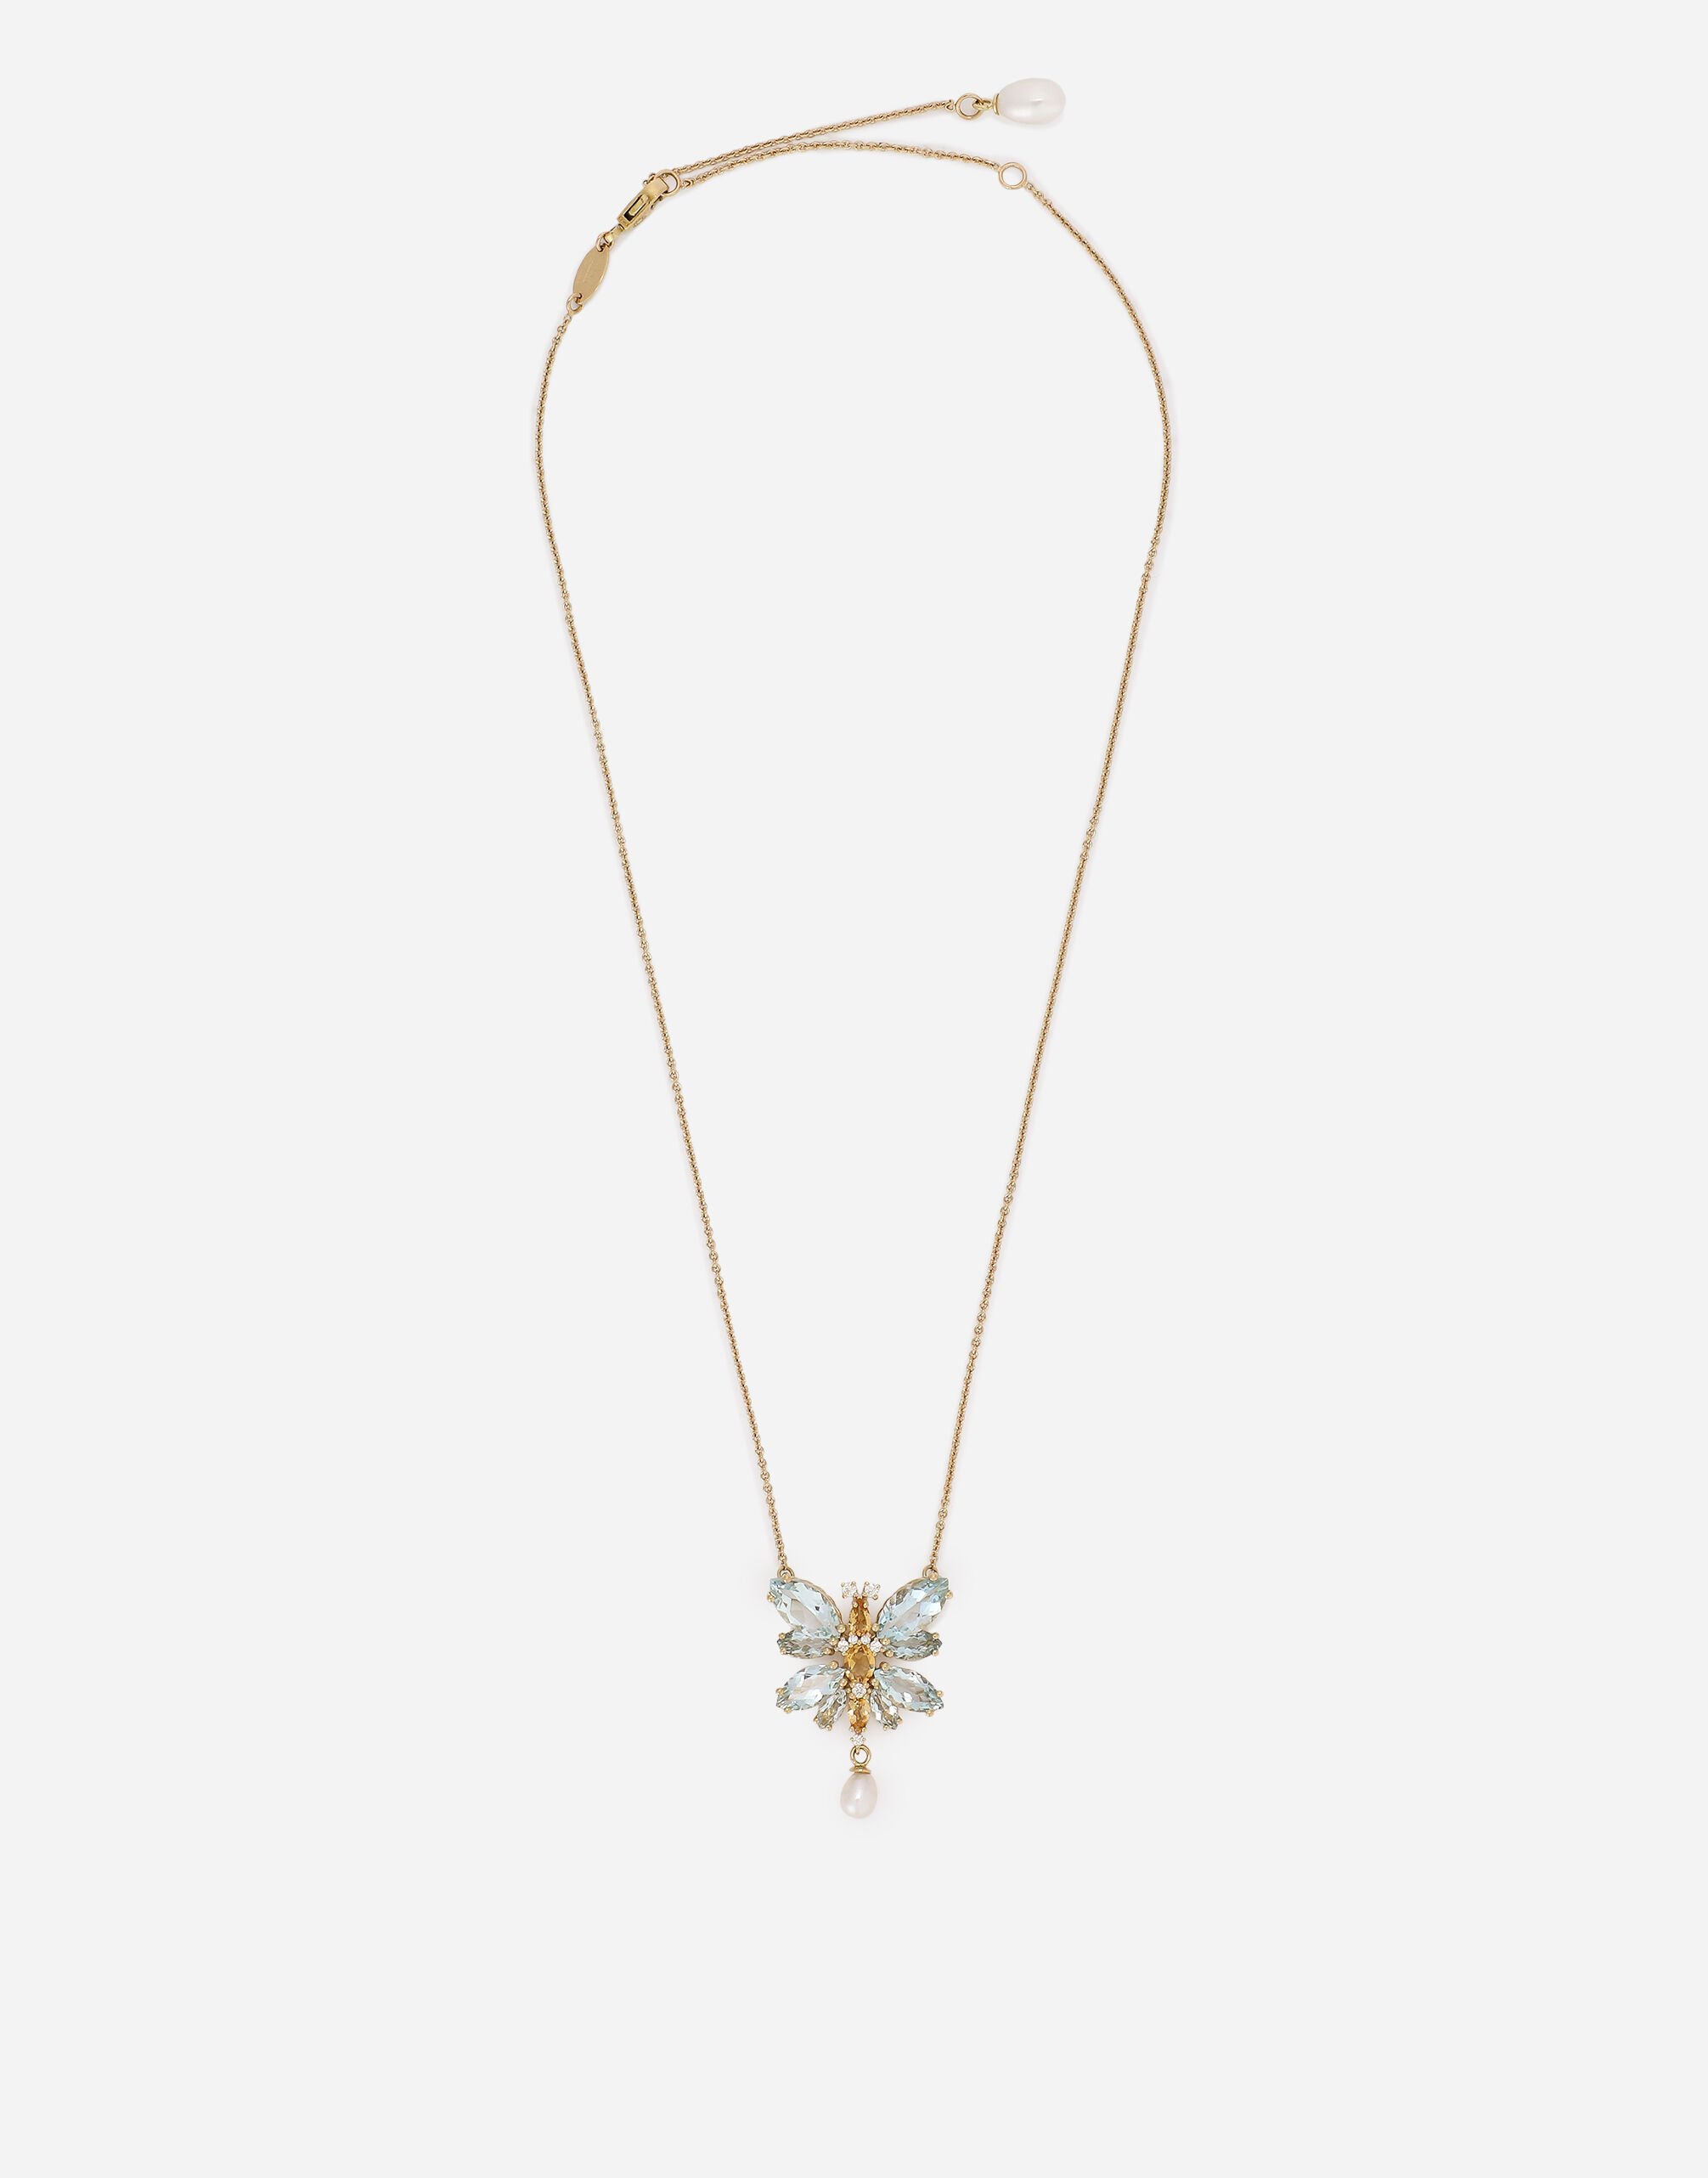 Dolce & Gabbana Spring necklace in yellow 18kt gold with aquamarine butterfly Gold WRMR1GWMIXC